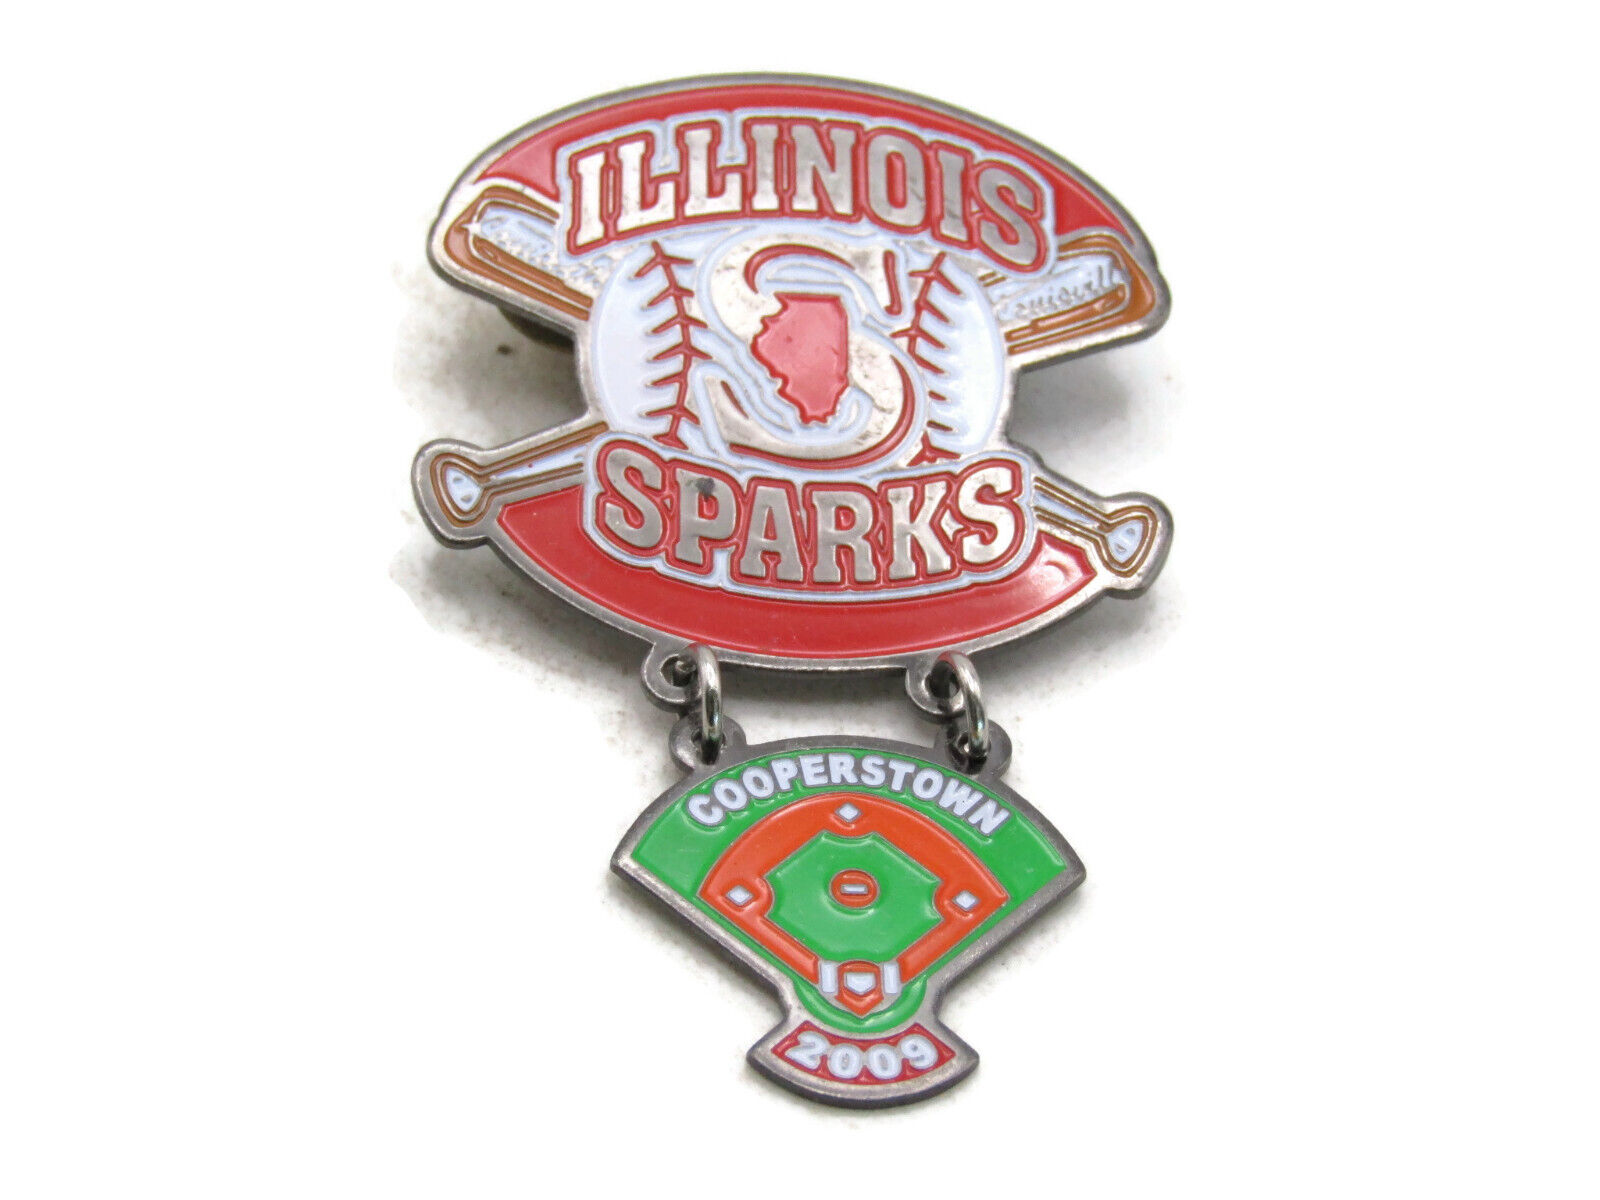 2009 Cooperstown Illinois Sparks Baseball Pin